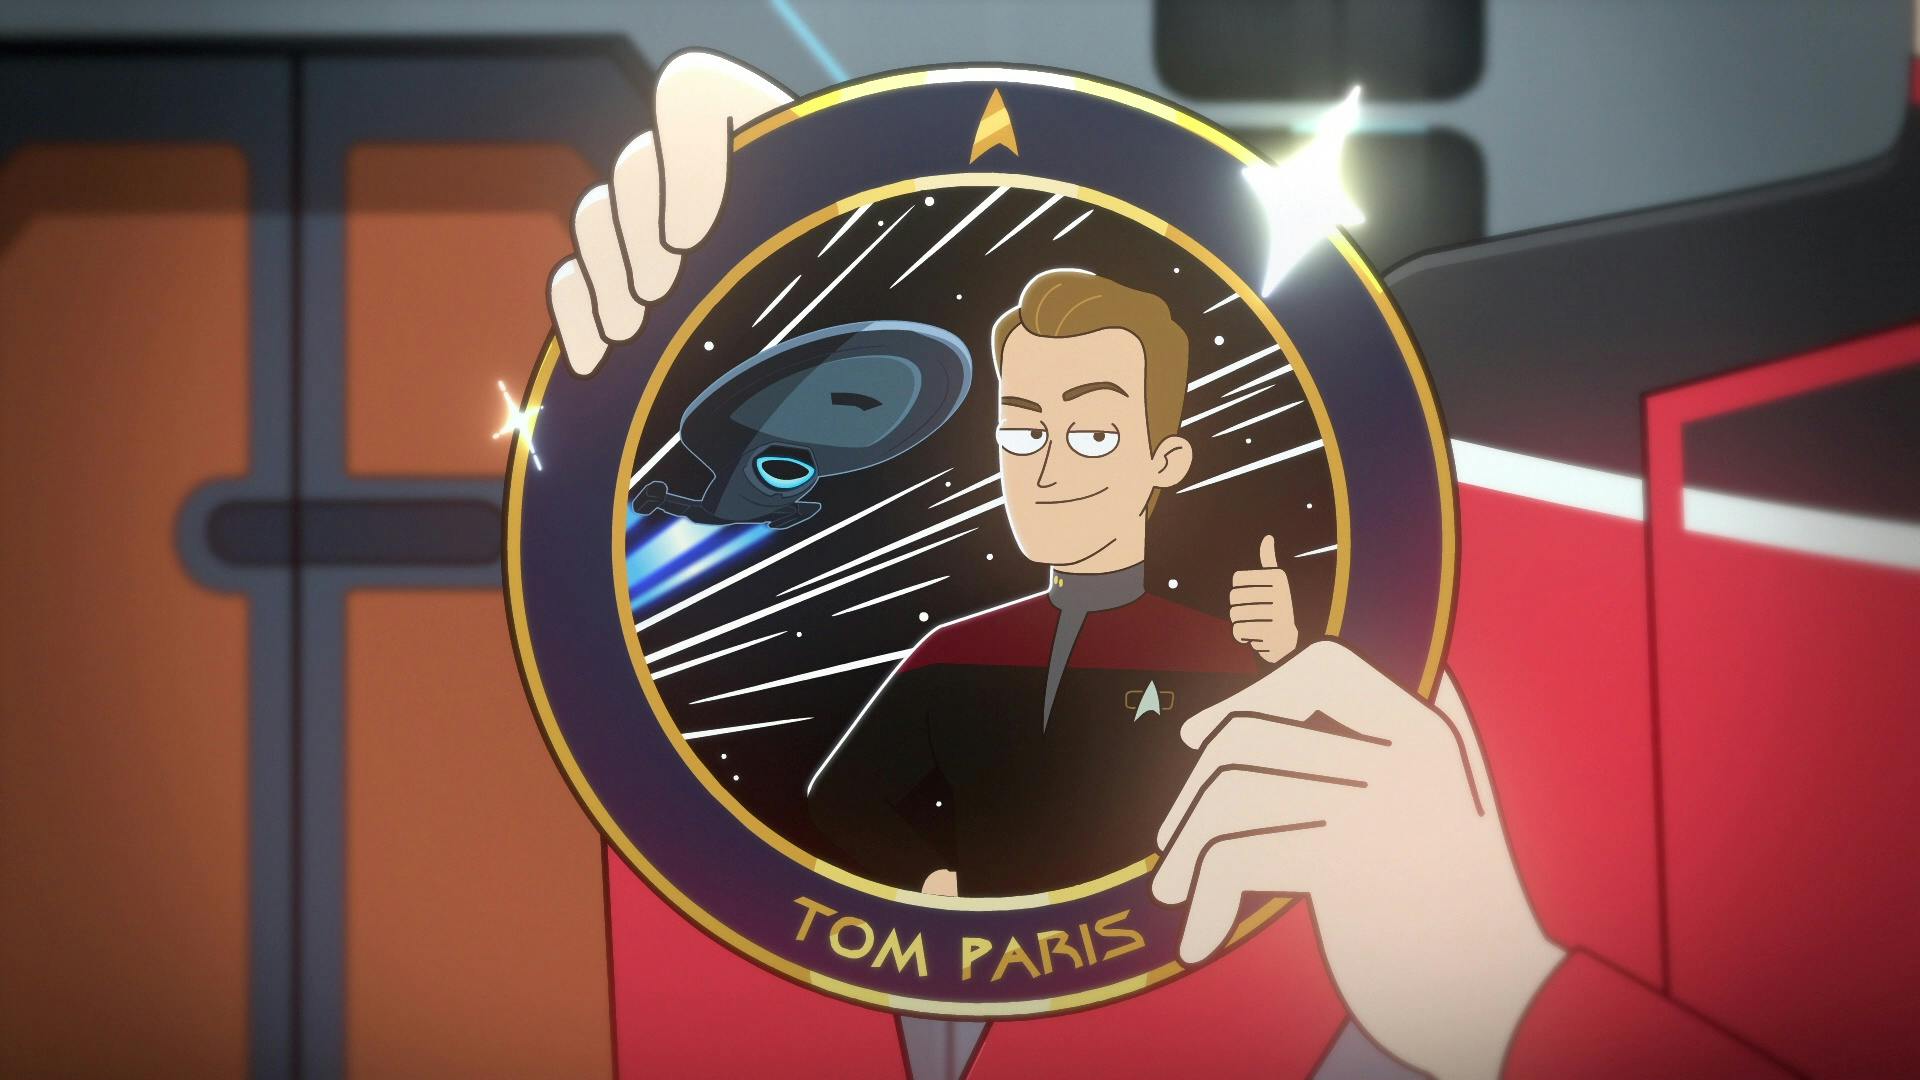 Boimler proudly shows off his Tom Paris collector plate in 'We'll Always Have Tom Paris'